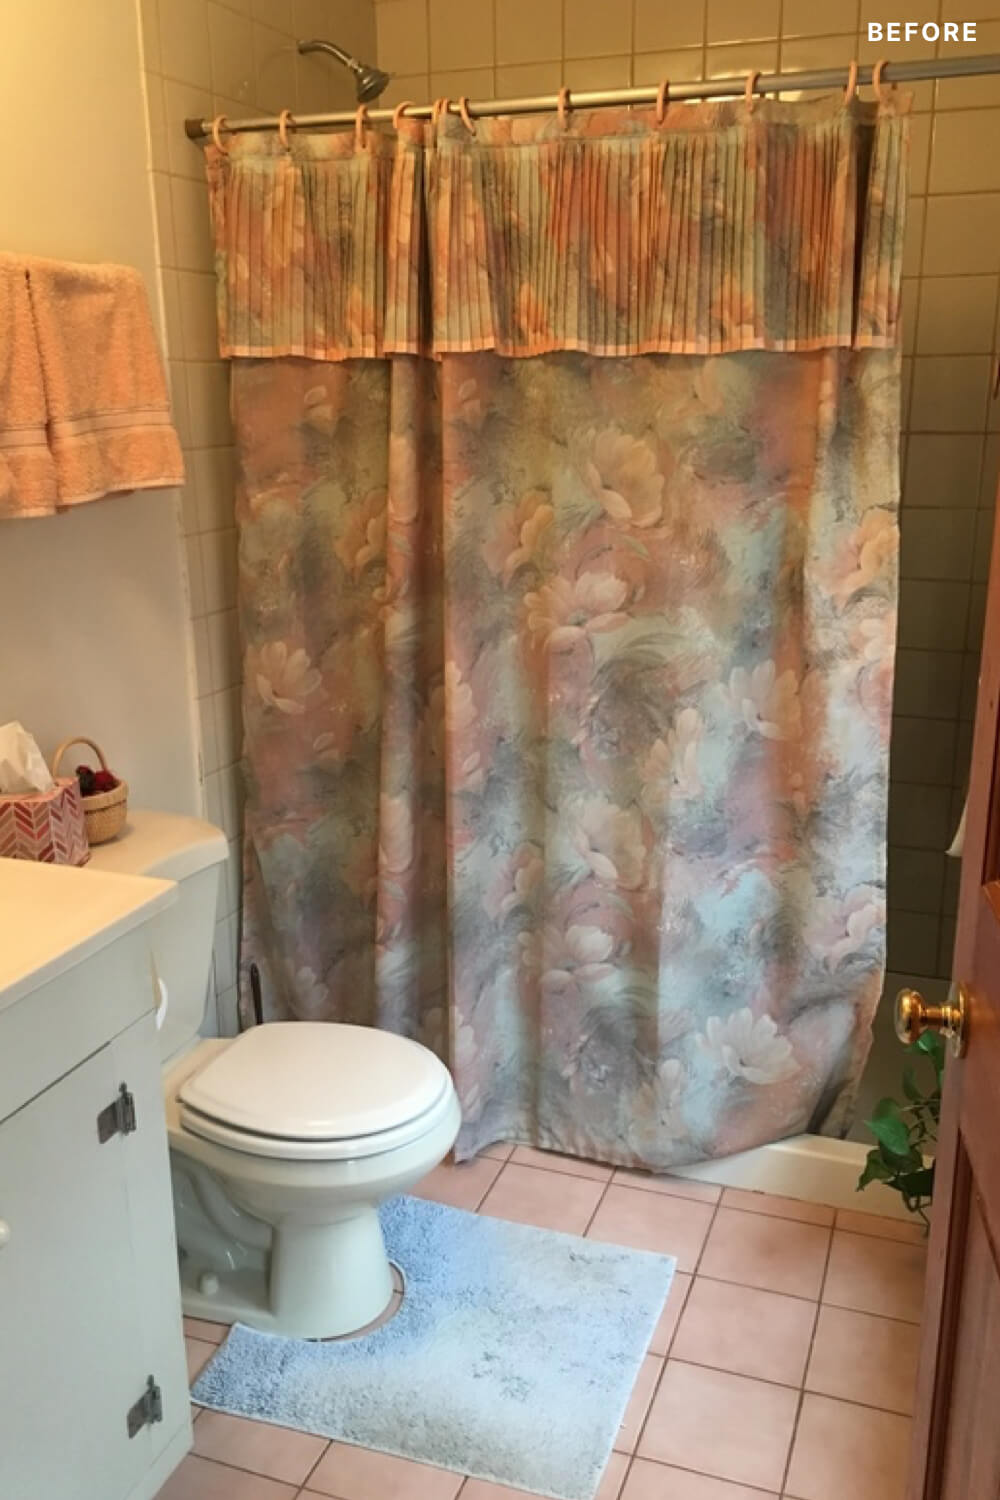 Floral orange shower curtain with orange floor tile and white toilet before renovation